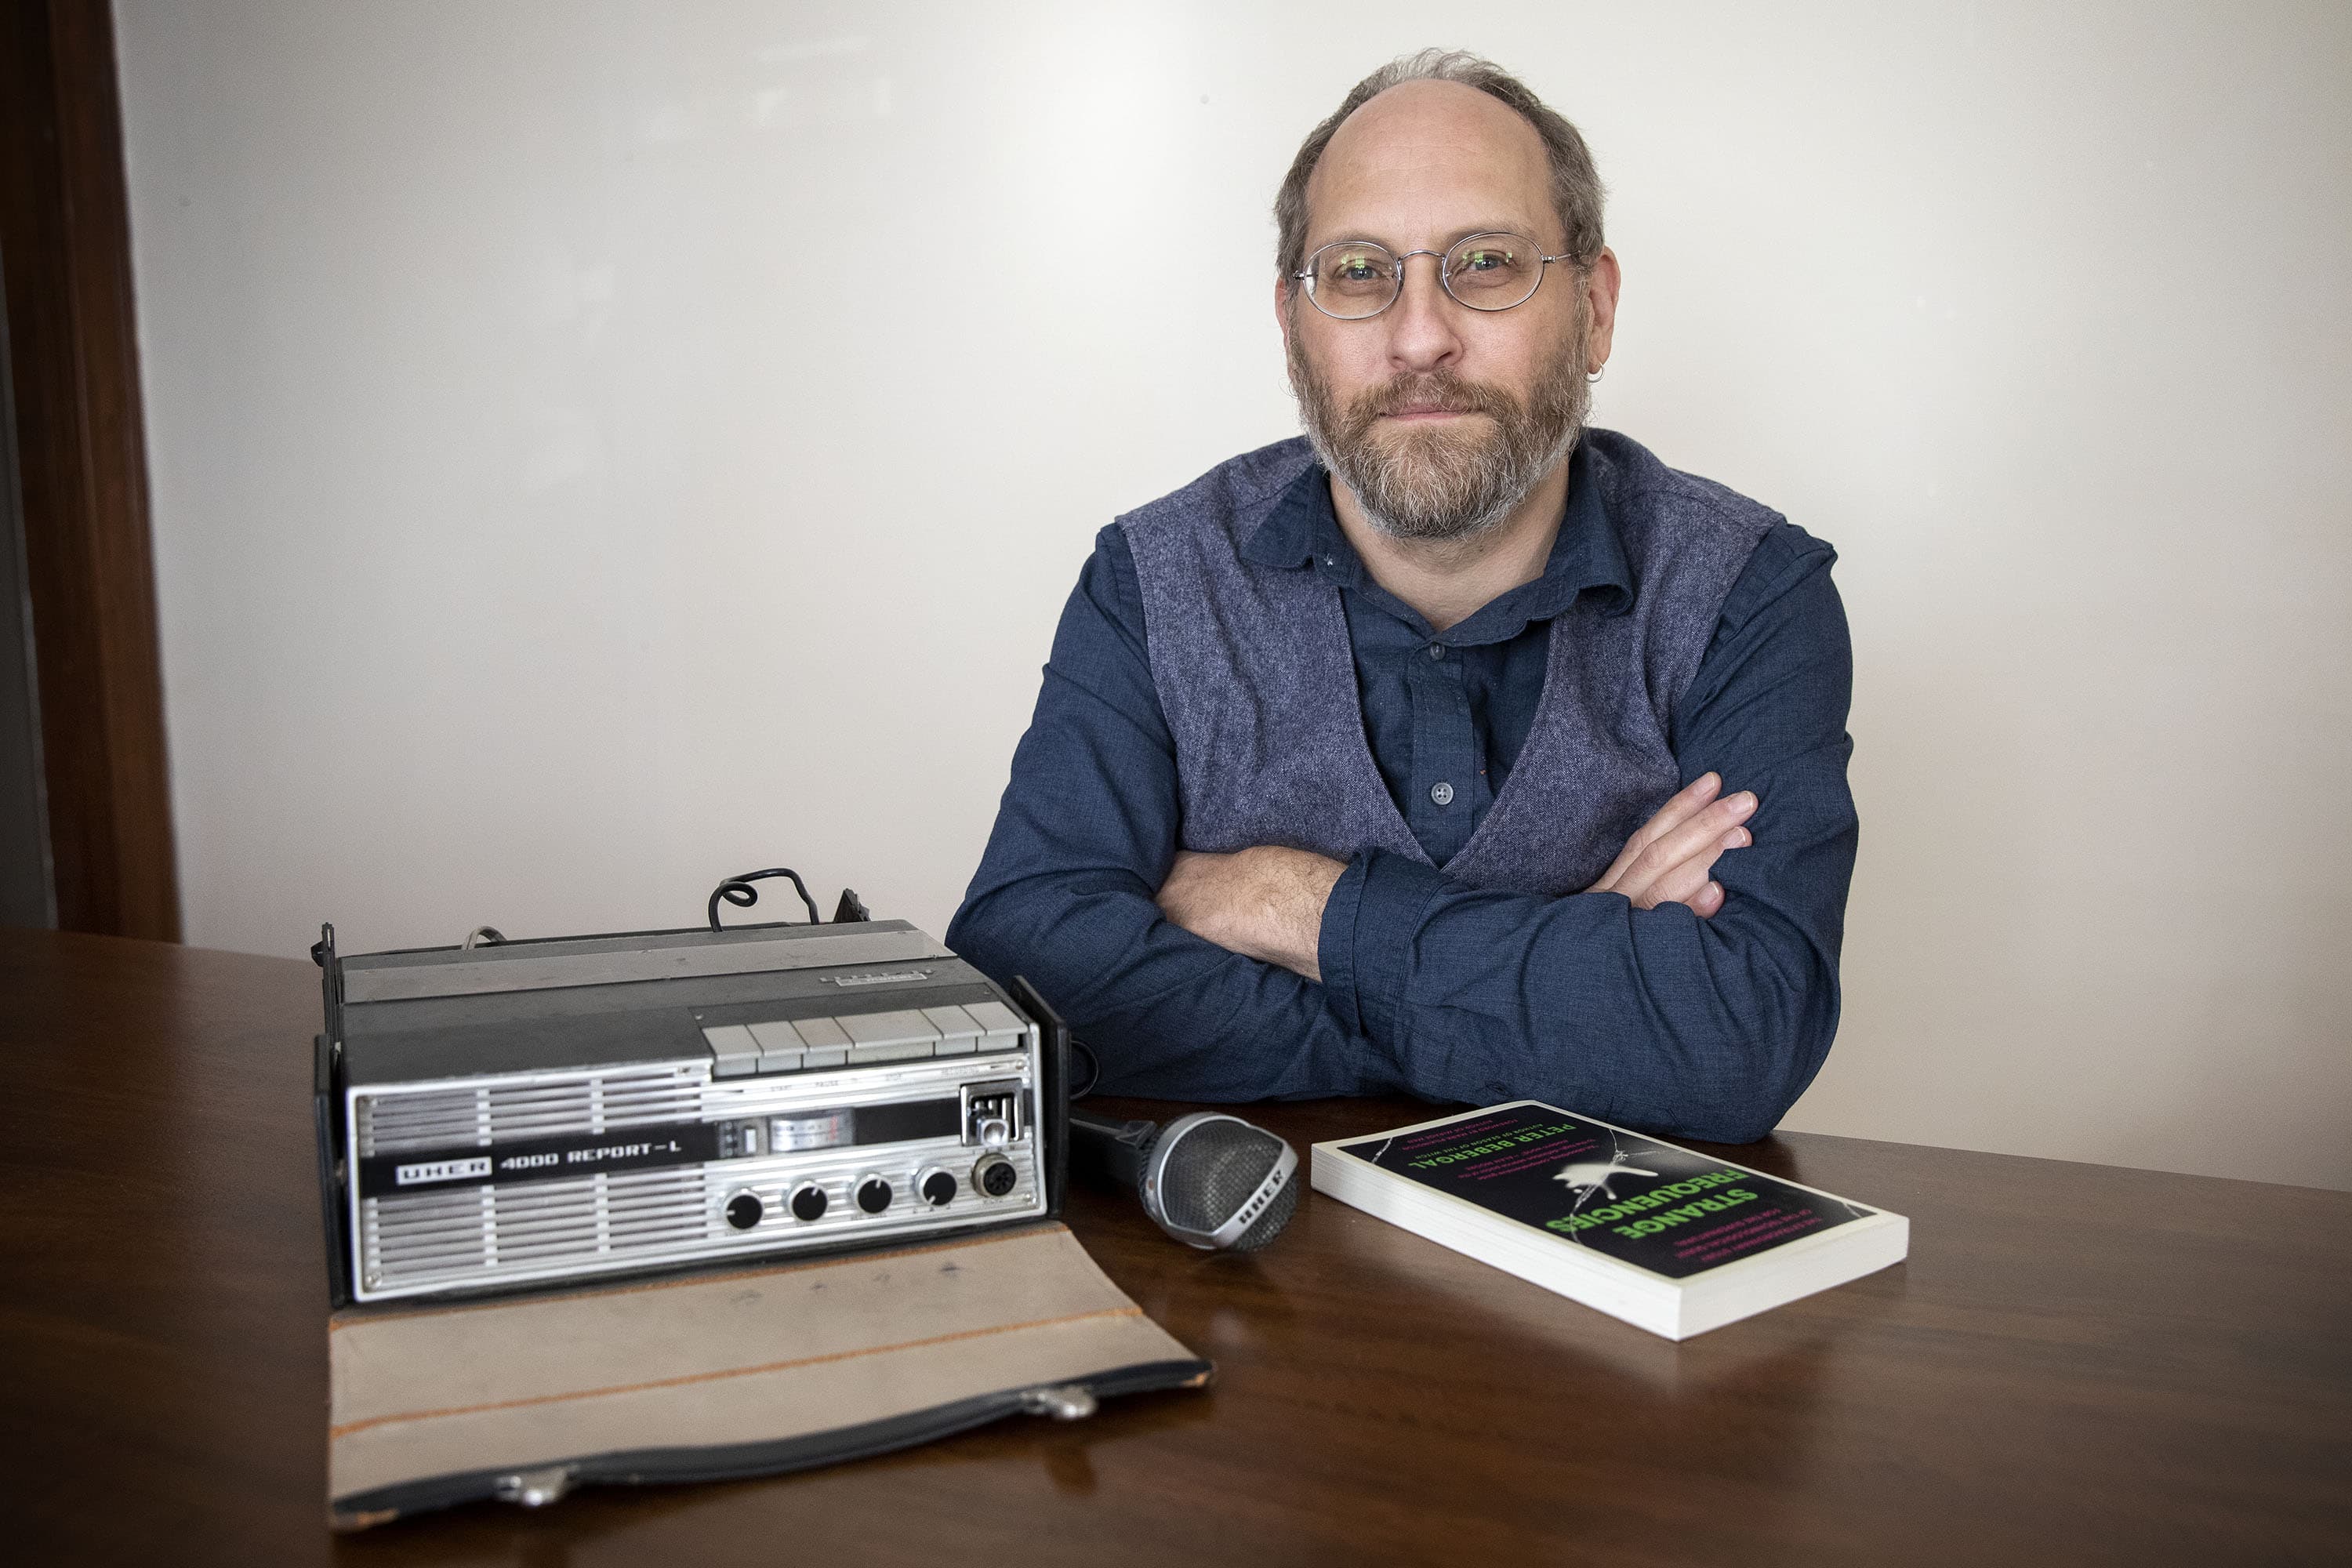 Author Peter Bebergal with his father's reel-to-reel recorder. (Robin Lubbock/WBUR)